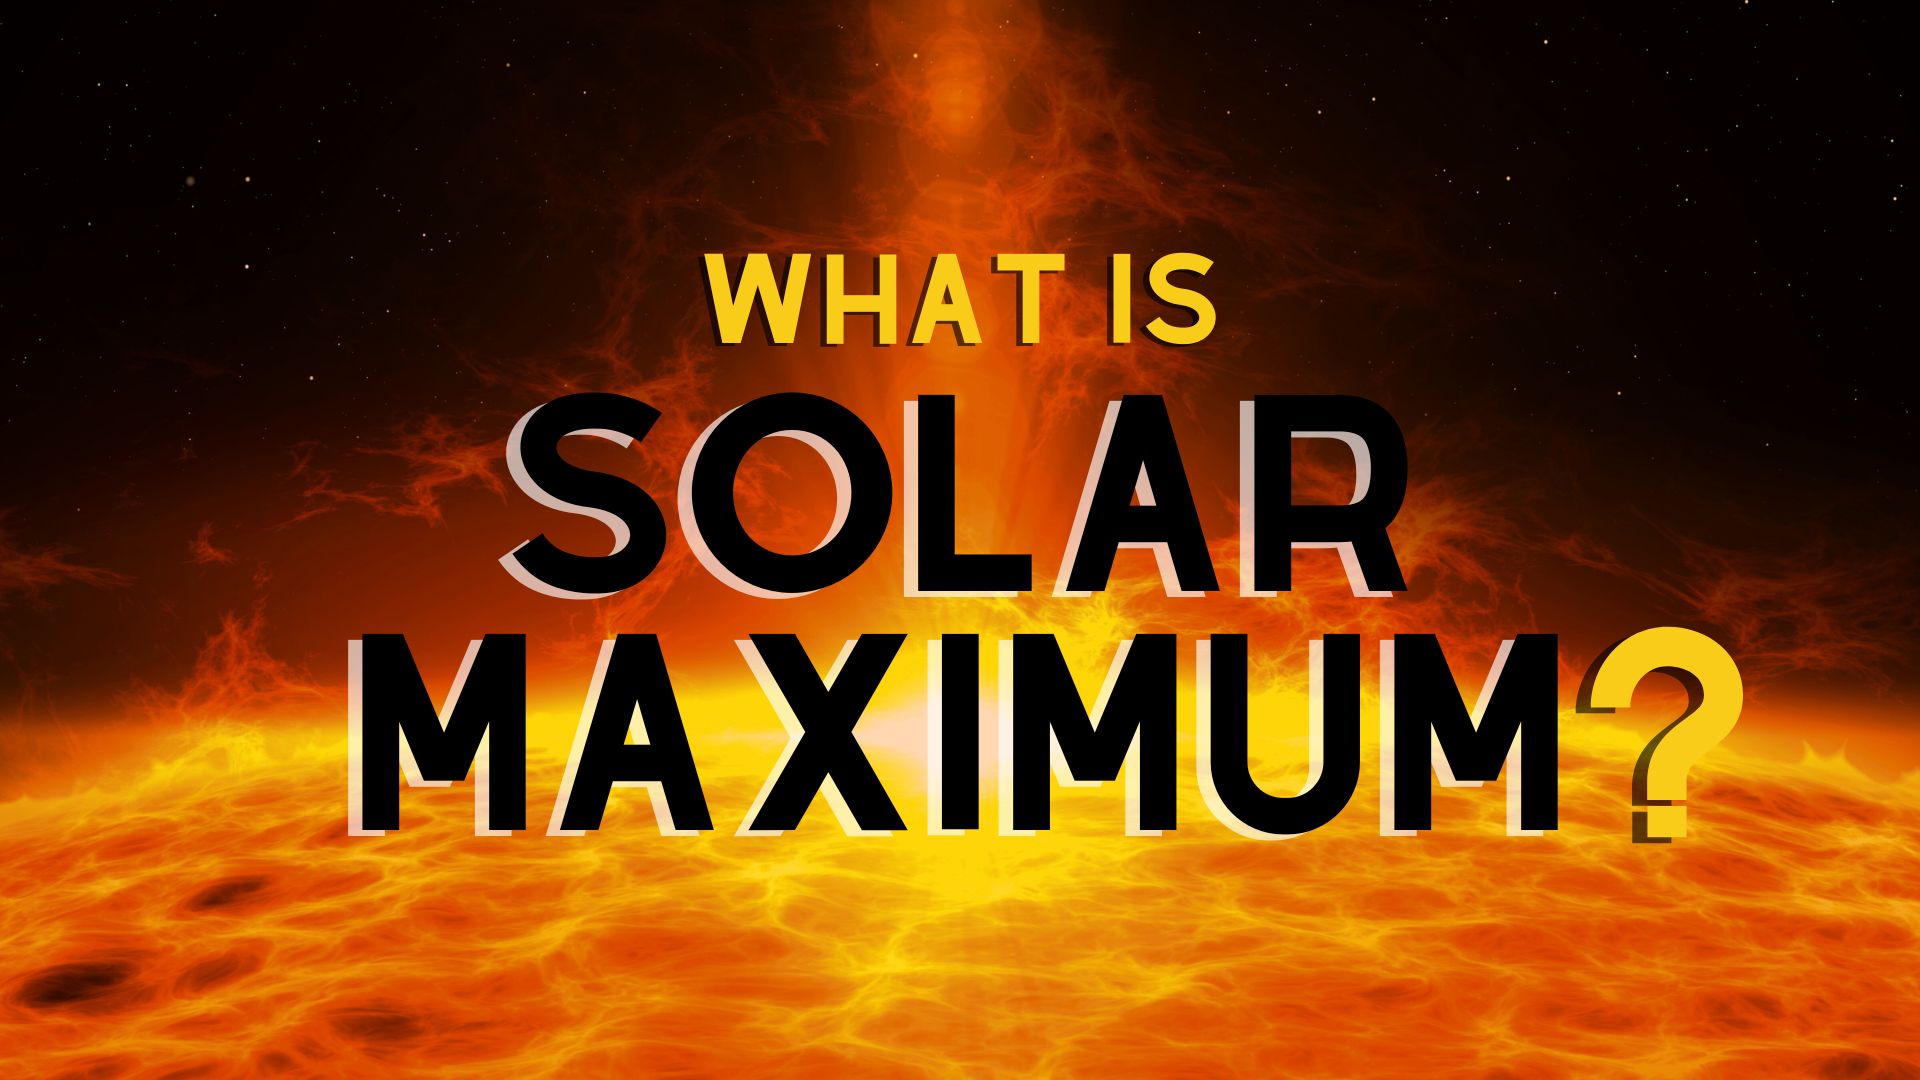 Solar maximum: What is it and when will it occur? Space